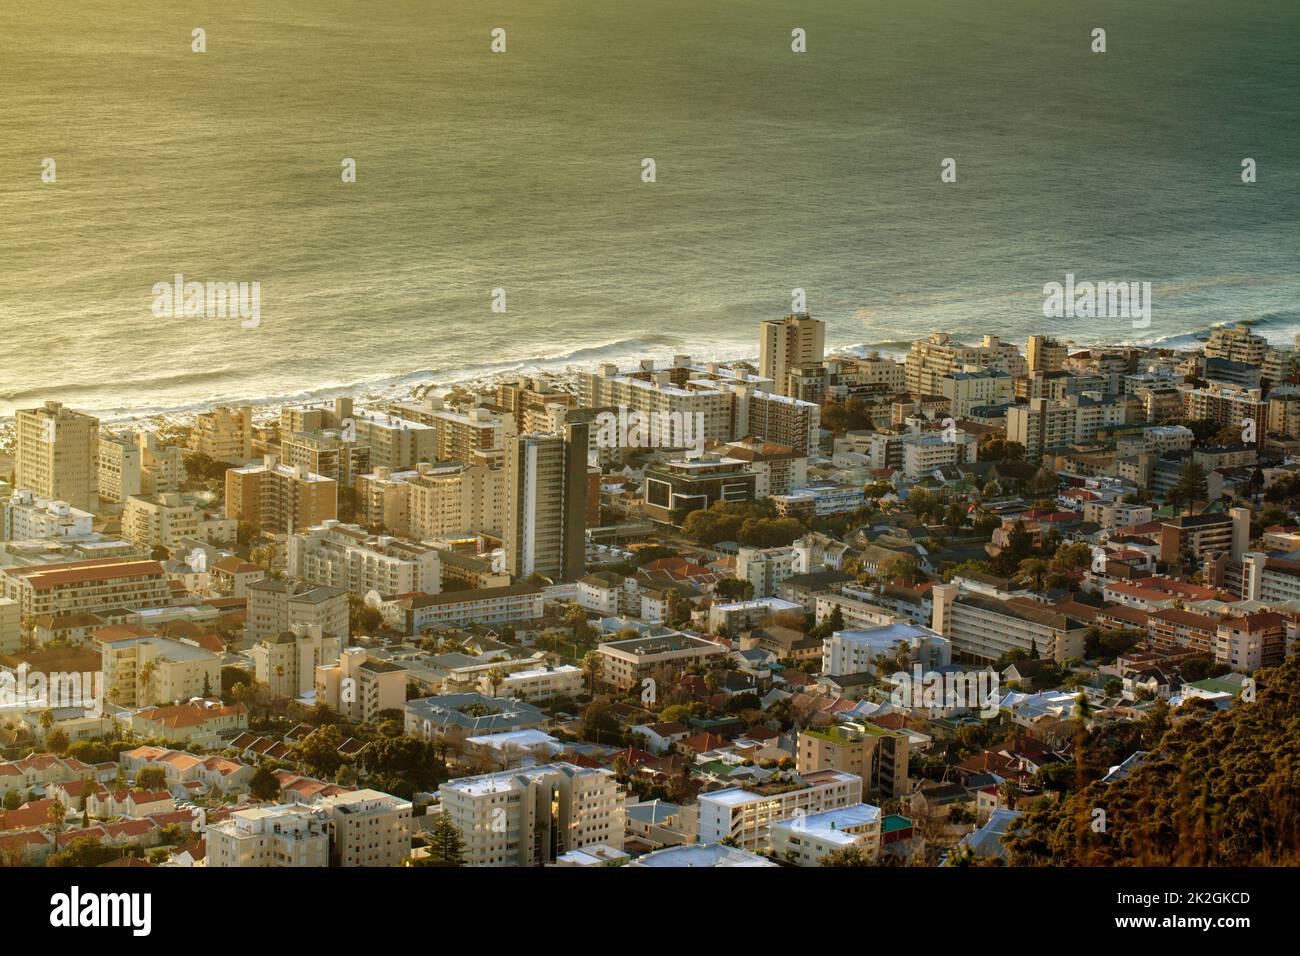 Seapoint by day. An aerial view of Sea Point in Cape Town, the Western Province of South Africa. Stock Photo